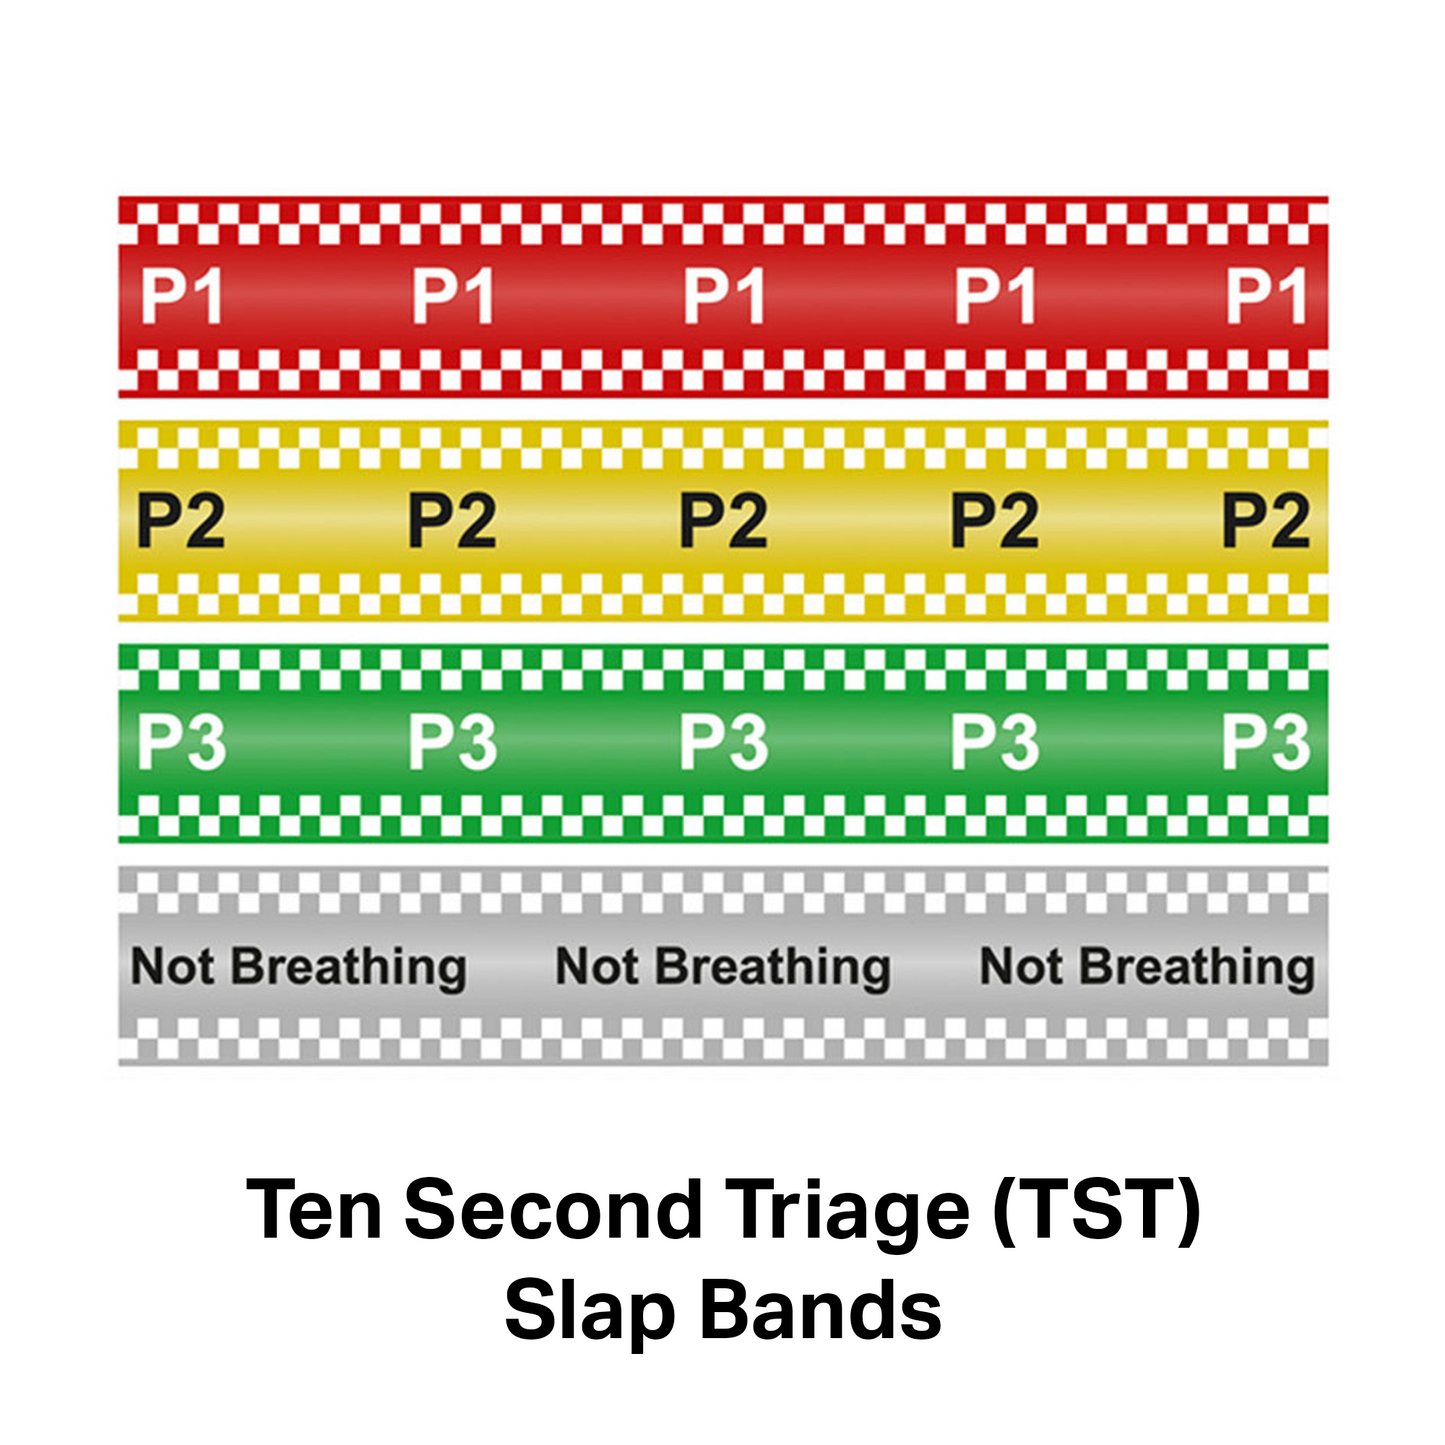 NHS Ten Second Triage (TST) Slap Band Pack of 20 - Green Case